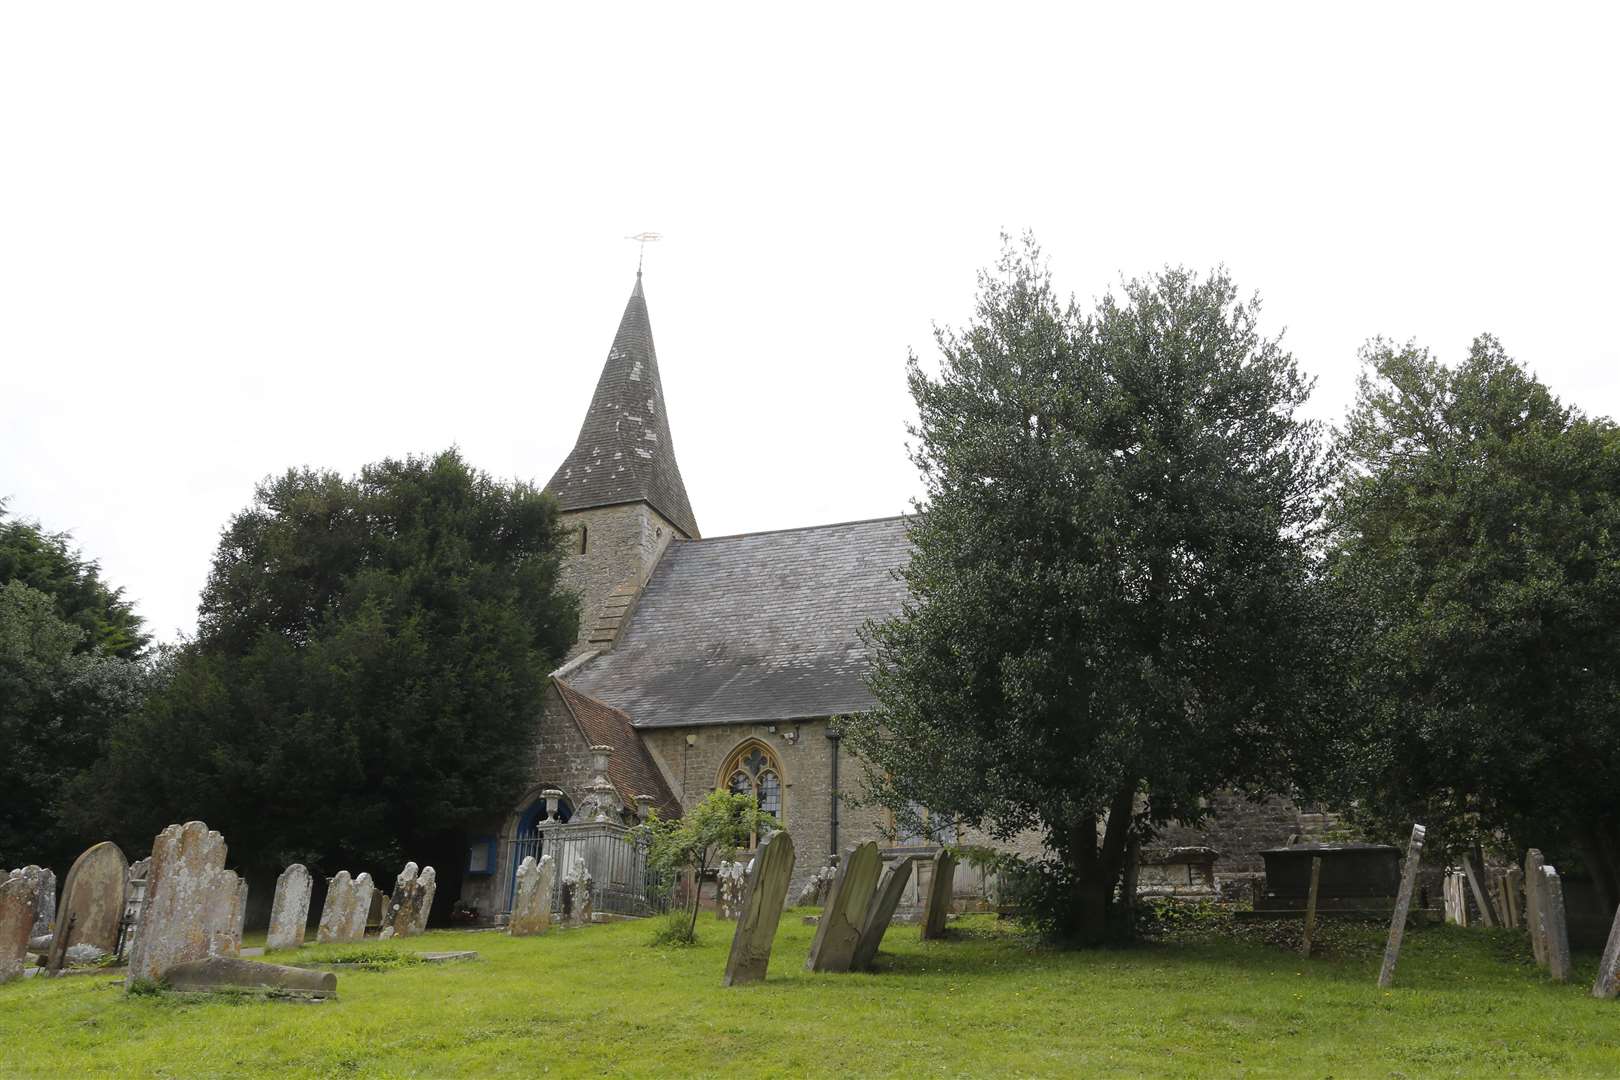 St John the Baptist at Wateringbury holds the grave of the last man to hold the post of Borsholder